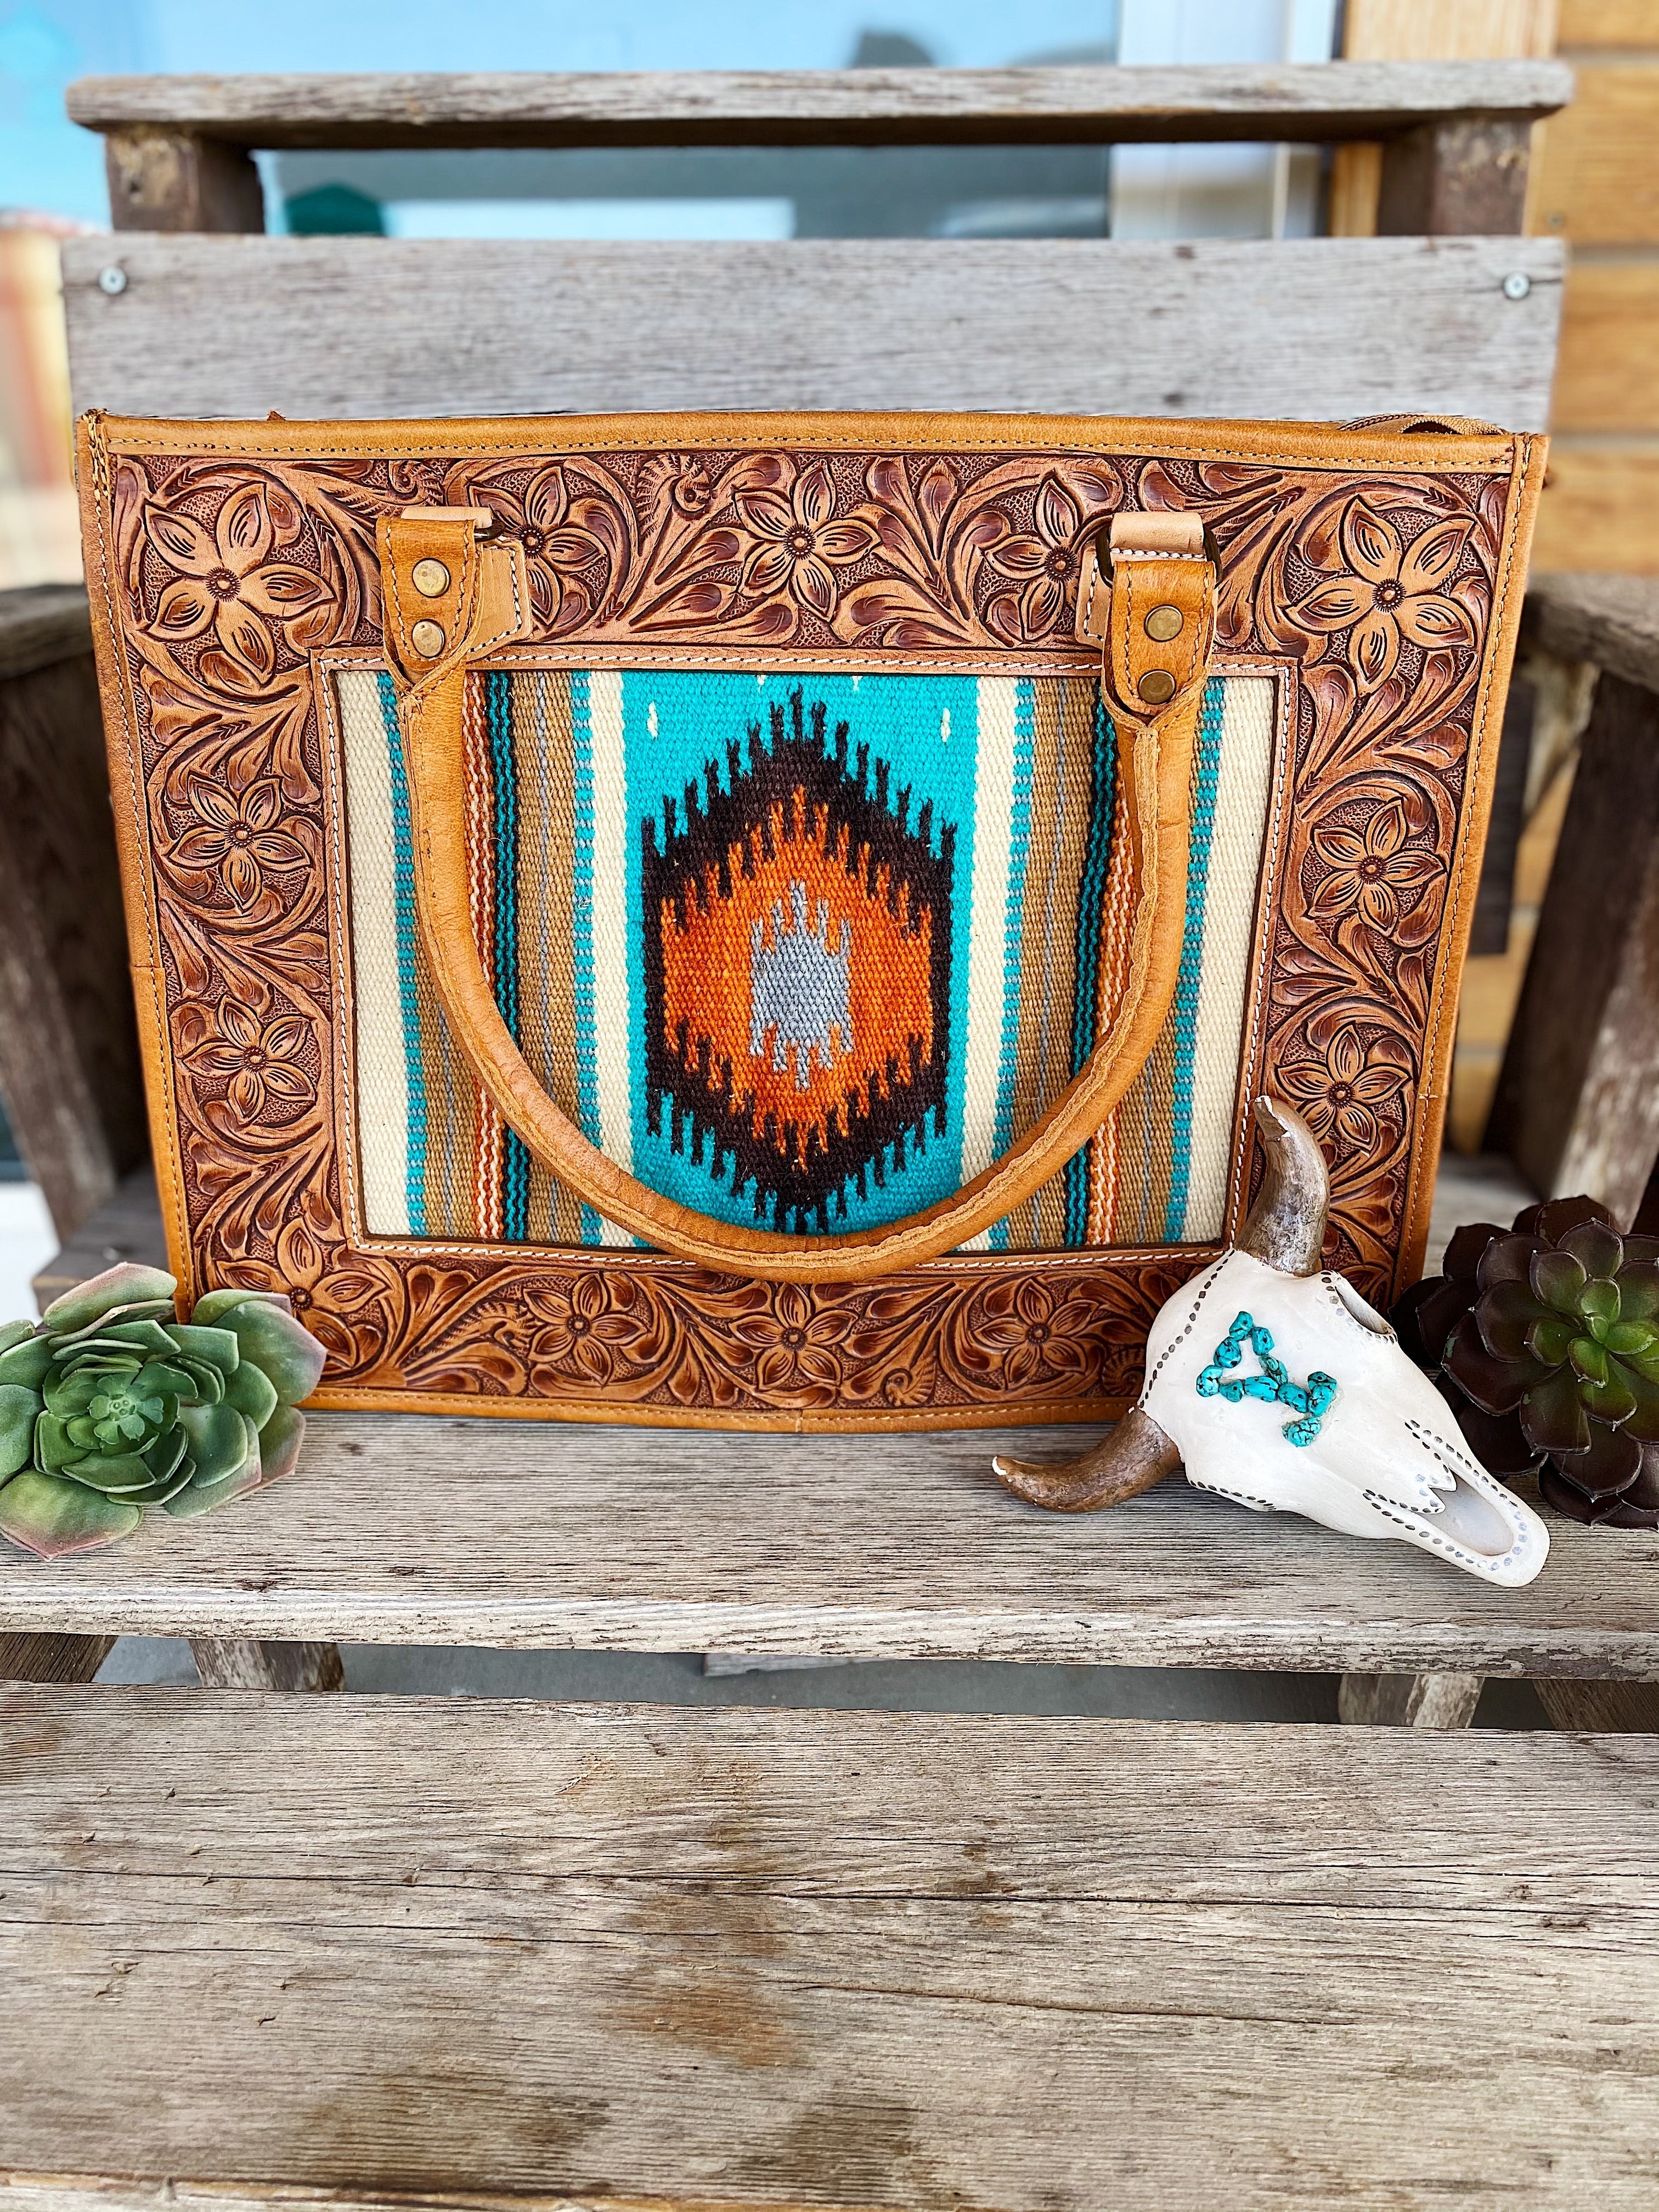 The Calamity Tote - Turquoise & Rust